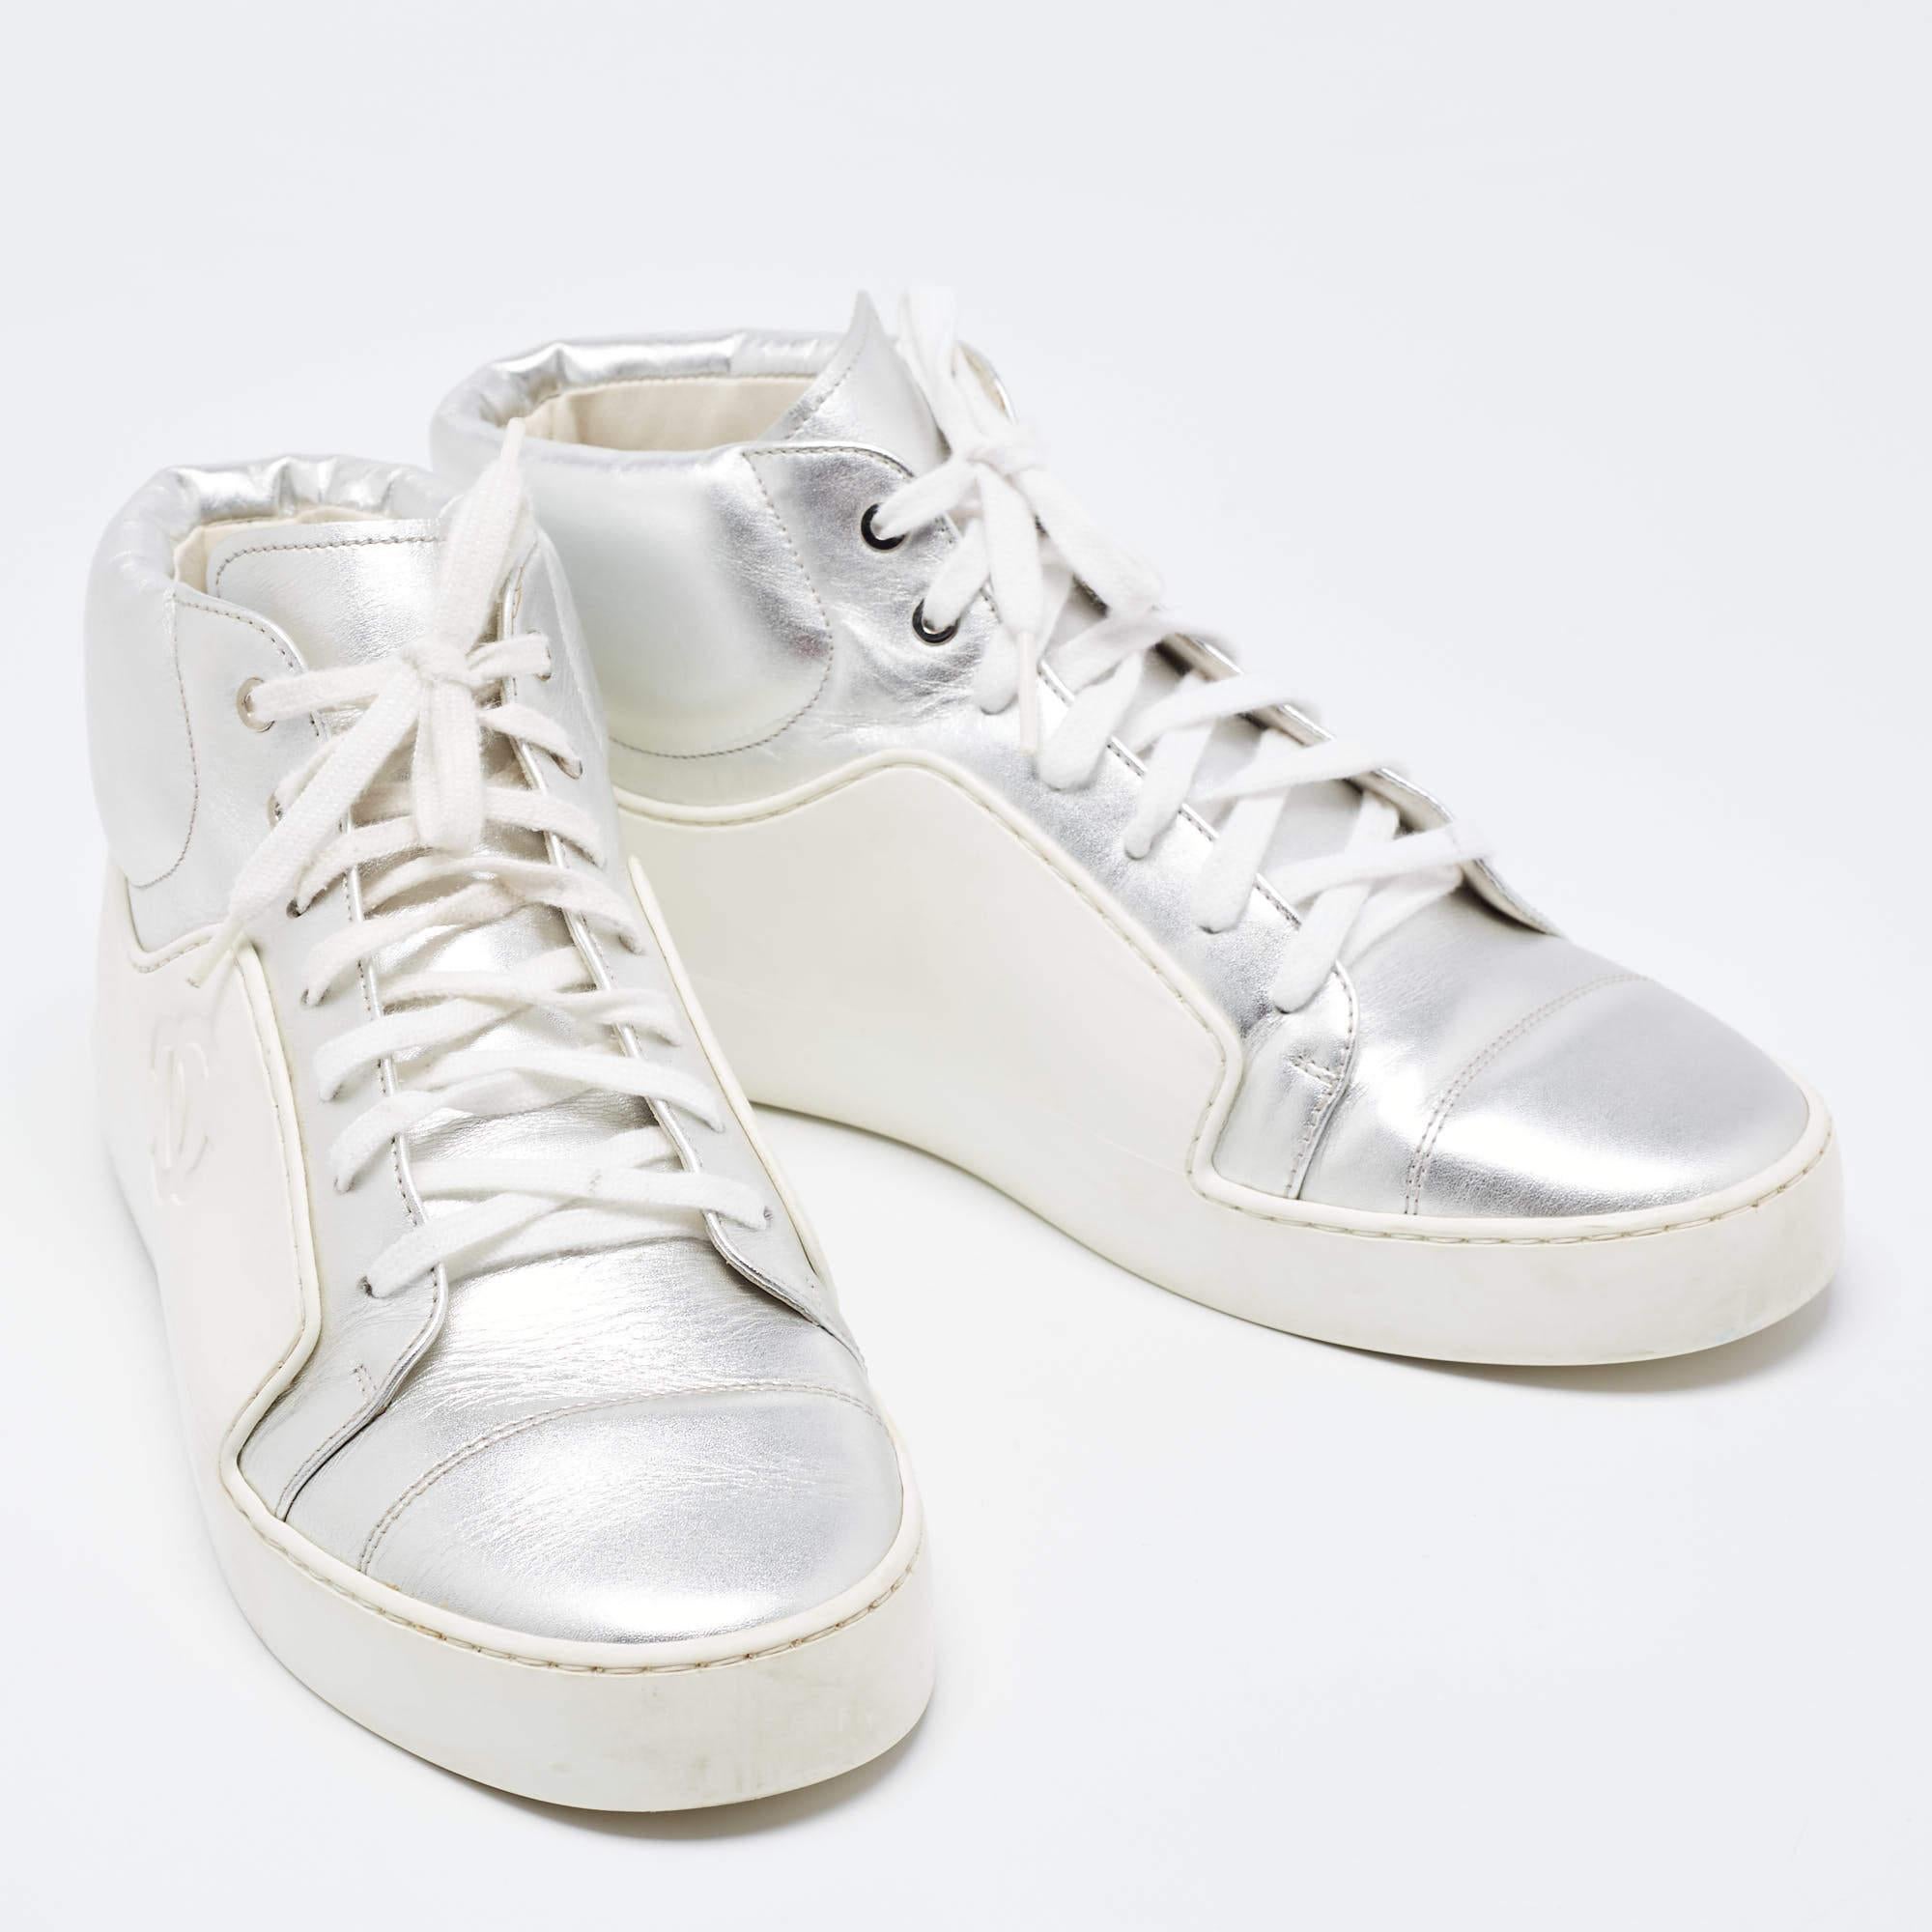 Give your outfit a luxe update with this pair of Chanel high-top sneakers. The shoes are sewn perfectly to help you make a statement in them for a long time.

